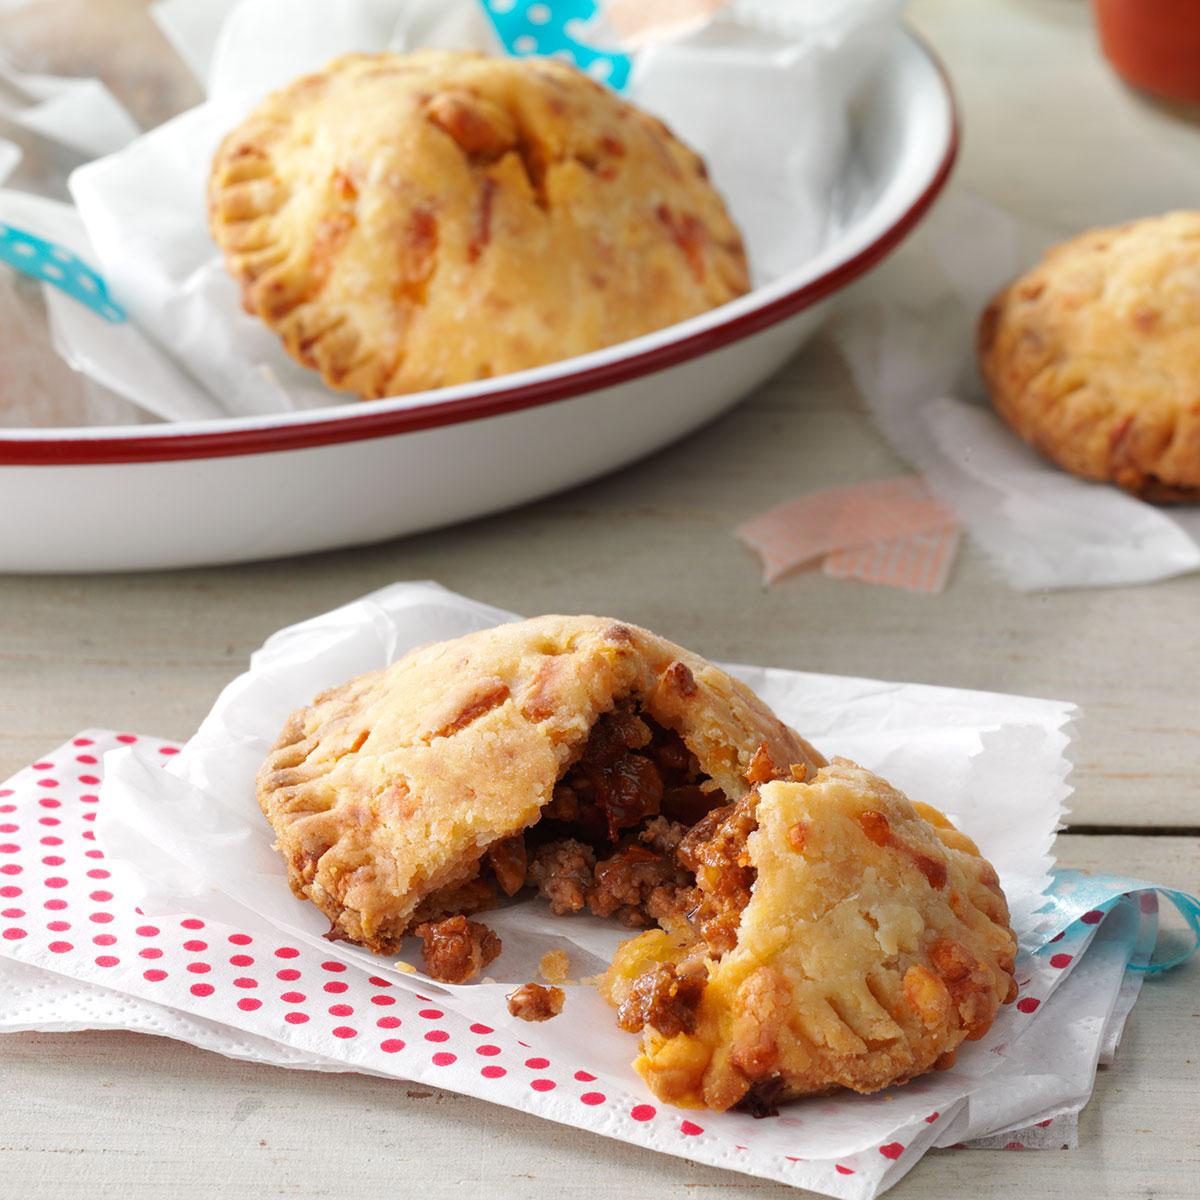 Miniature Meat Pies Recipe: How to Make It